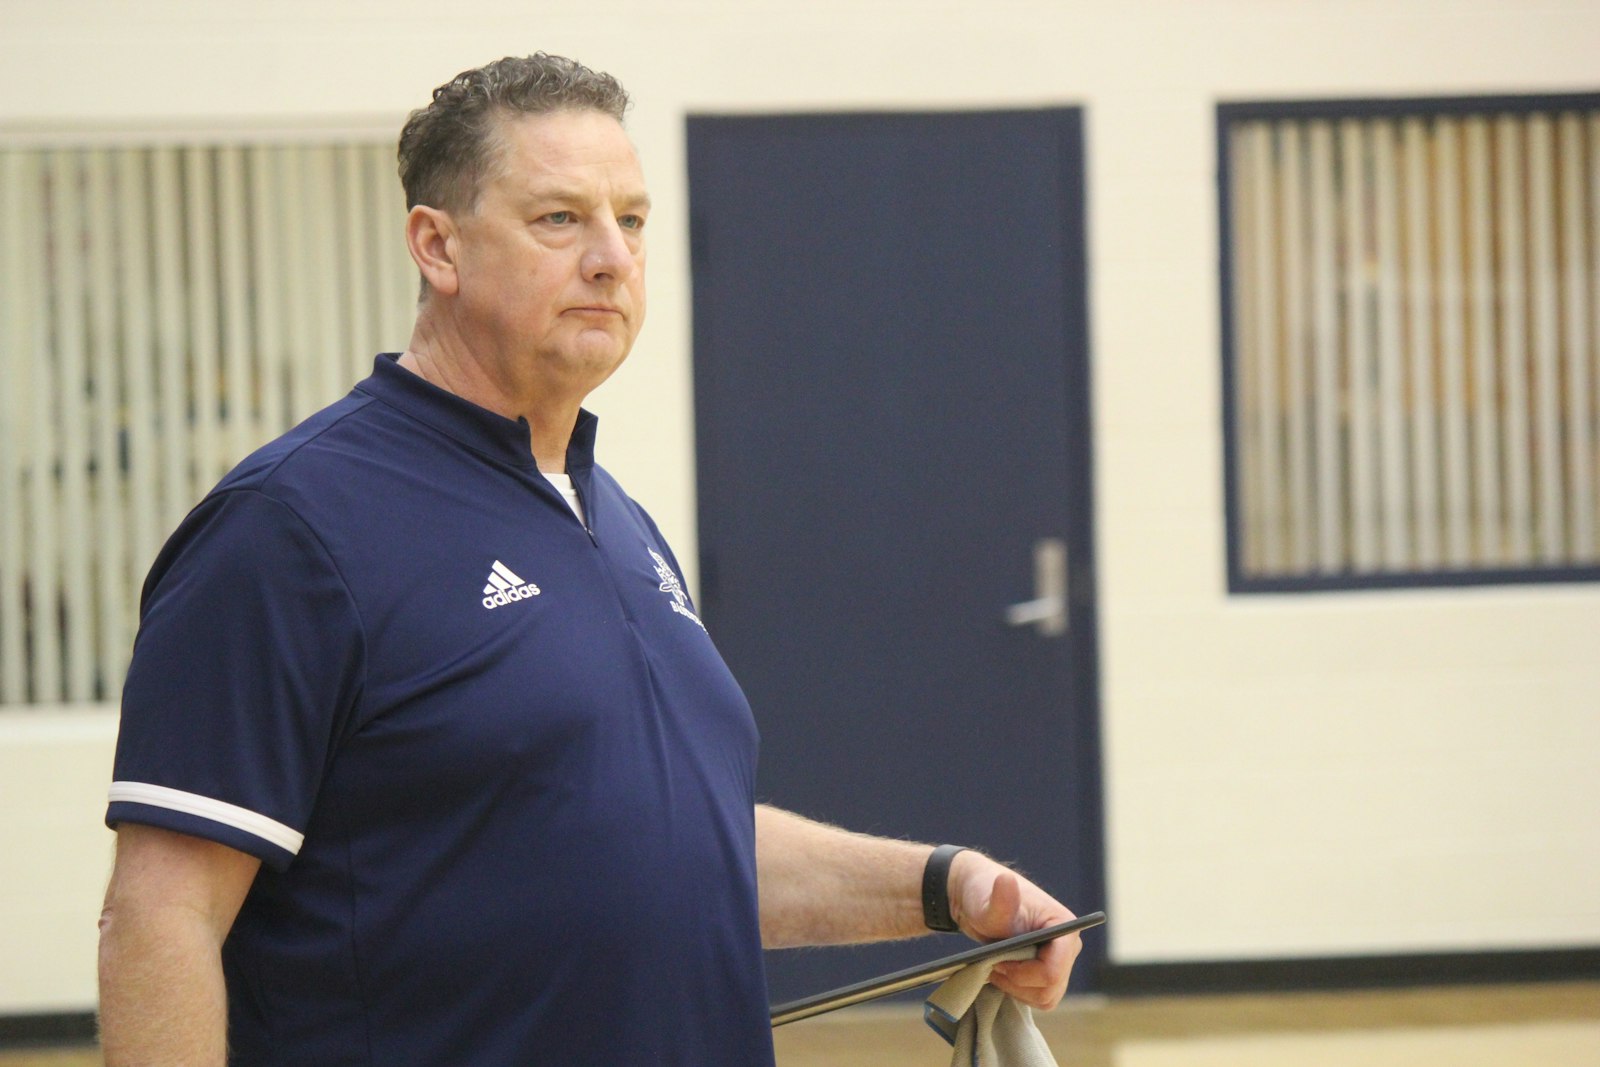 : For the past four winters, Glodich has been the head boys basketball coach at Chesterfield Austin Catholic. (Photo by Wright Wilson | Special to Detroit Catholic)